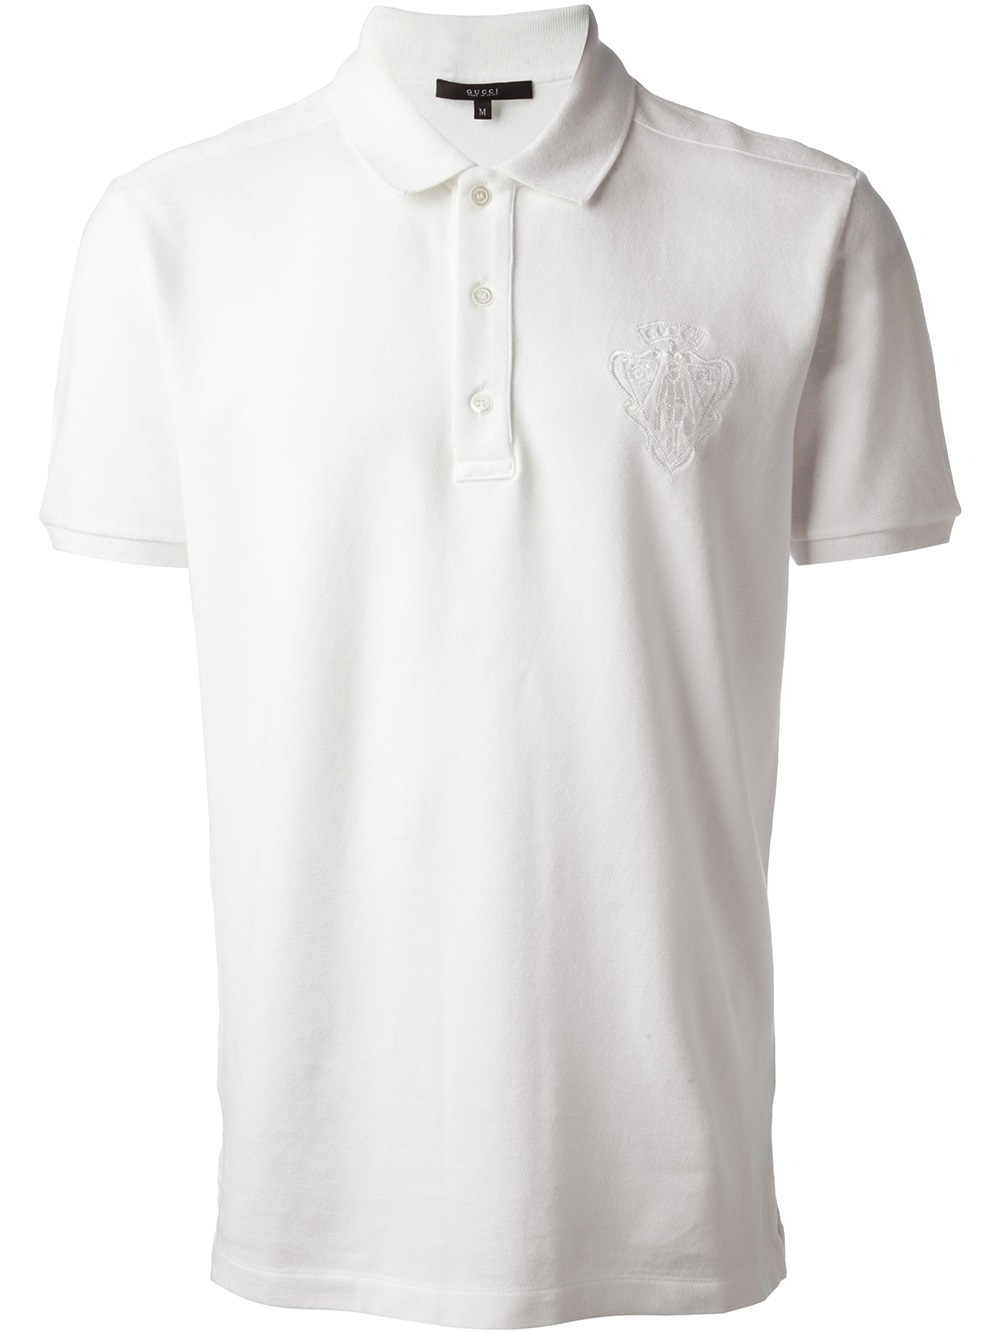 Lyst - Gucci Classic Polo Shirt in White for Men